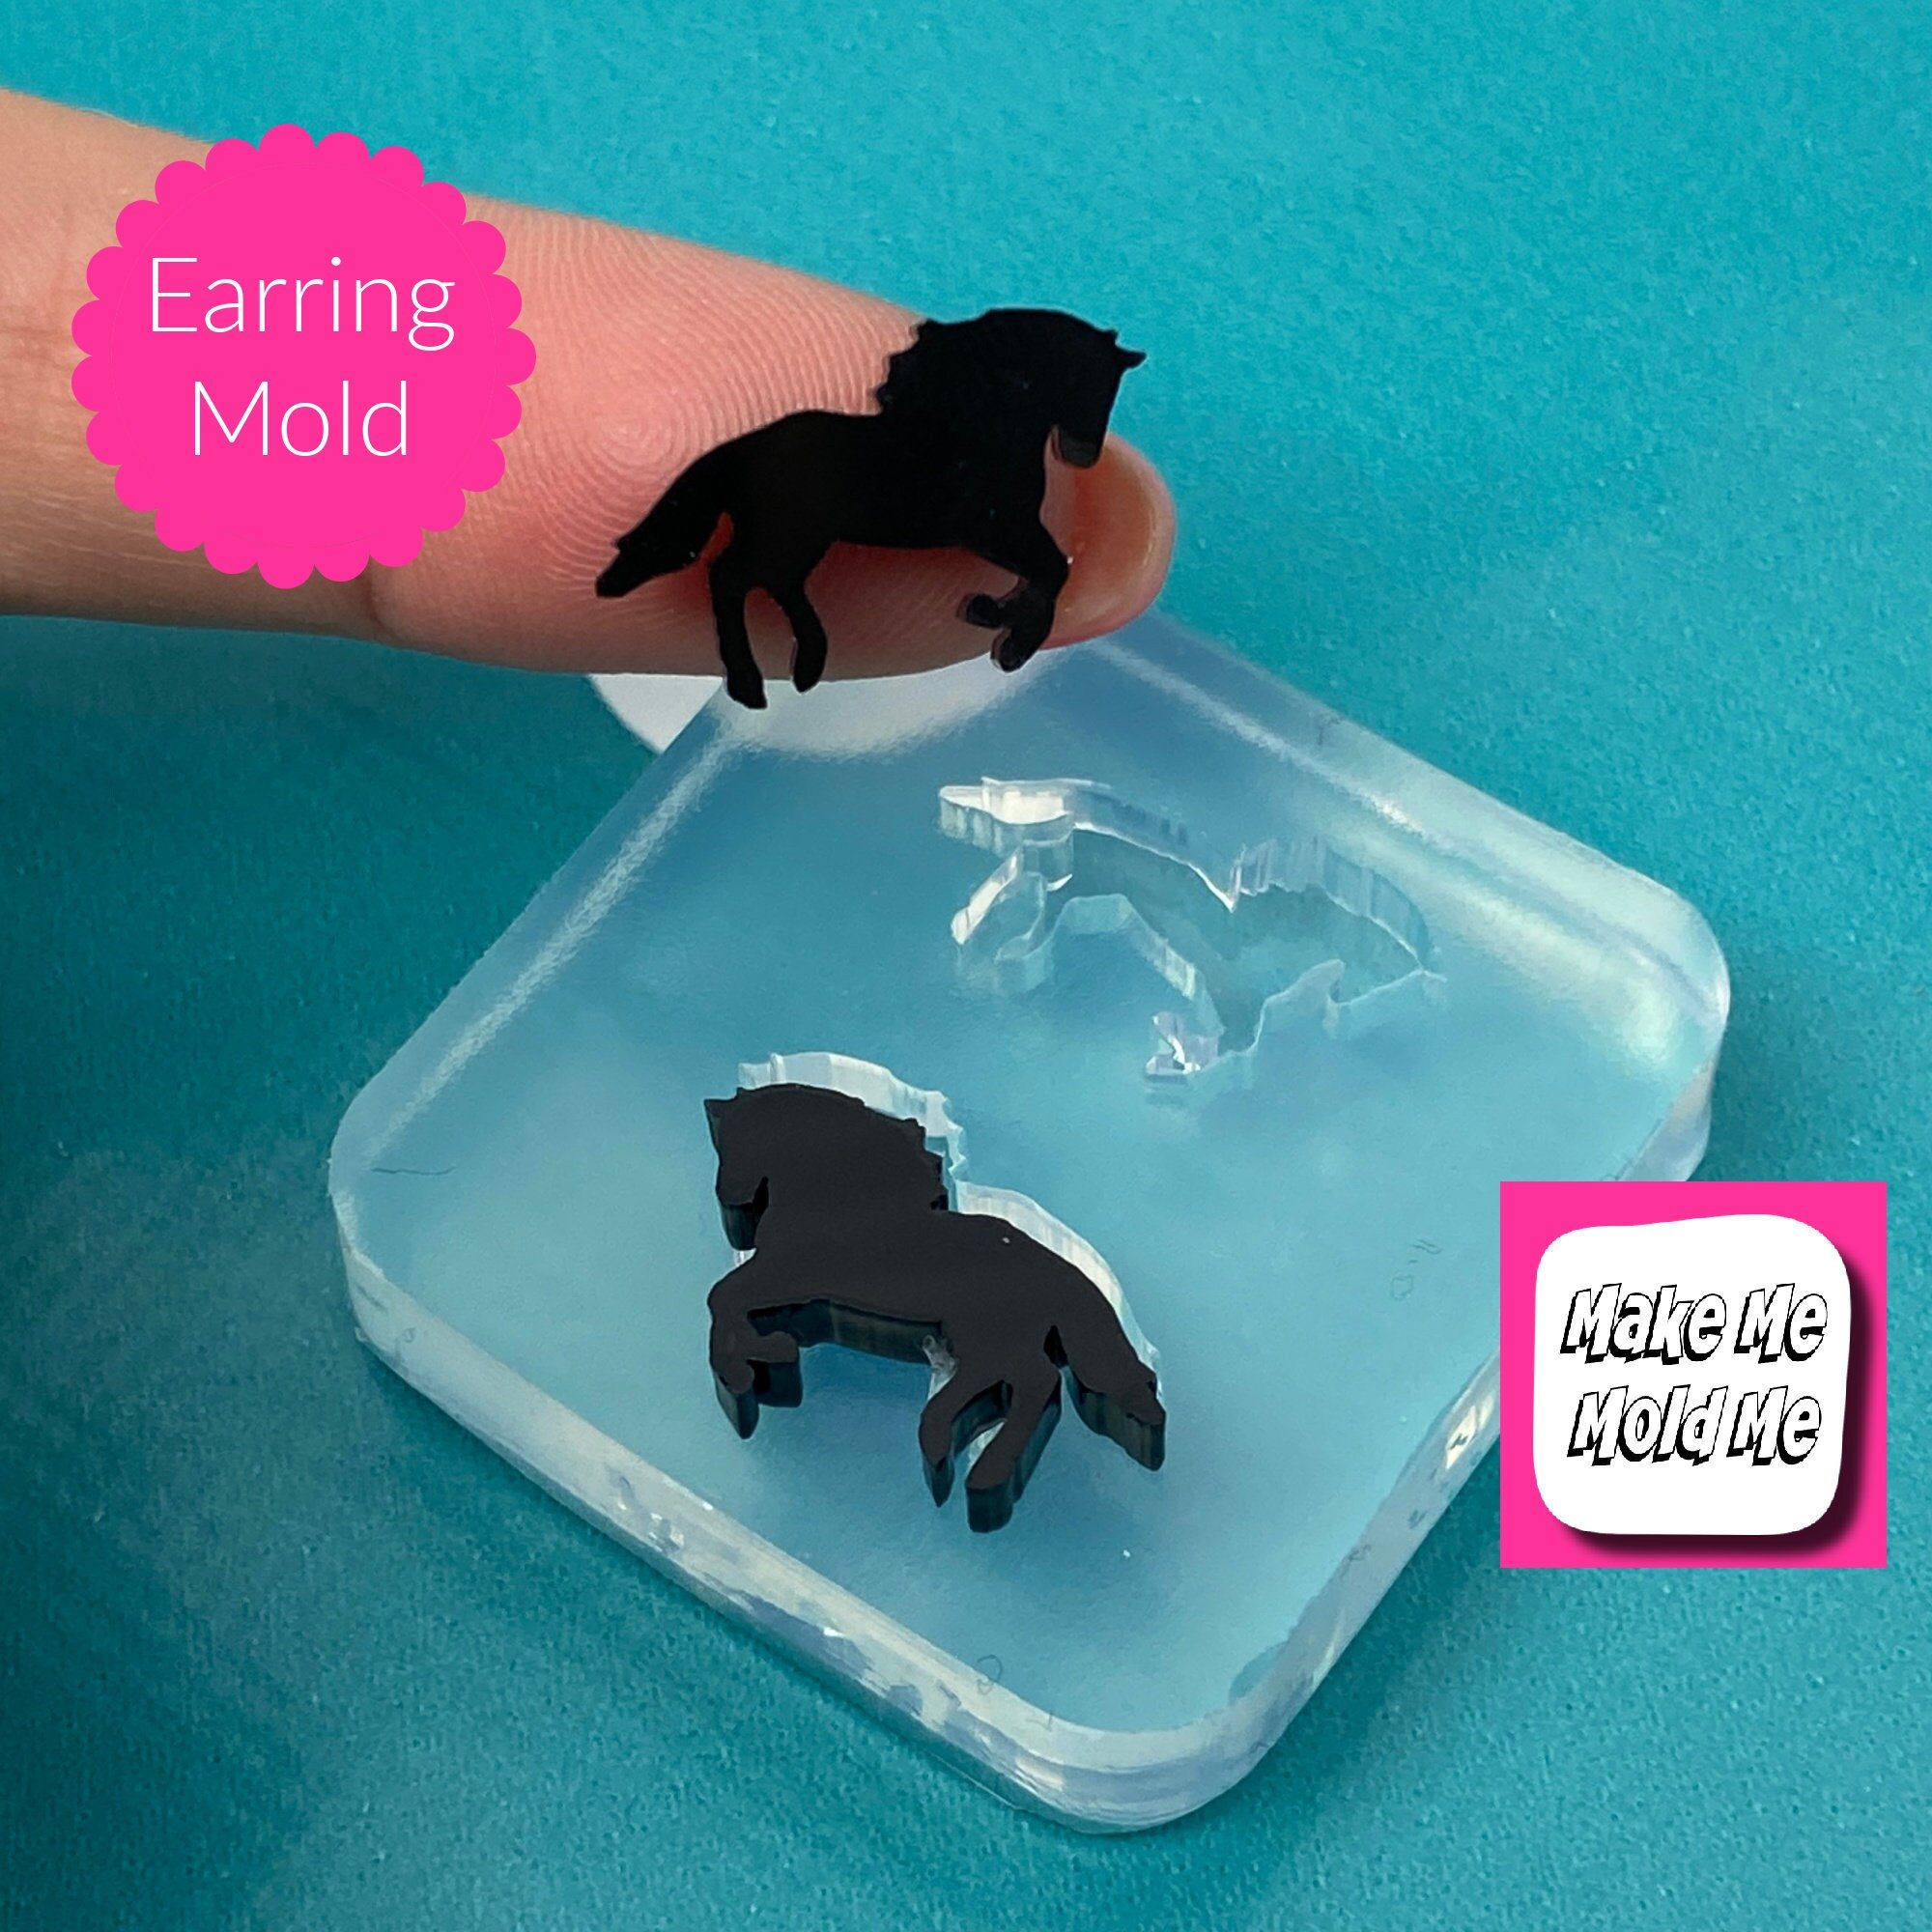 Mamamax 4 Pcs Resin Earring Mold, Earring Silicone Molds for Epoxy Resin,Durable  Earring Pendant Mold,DIY Craft Mould for DIY Women Earrings,Resin Jewelry, Pendant Craft Supplies 